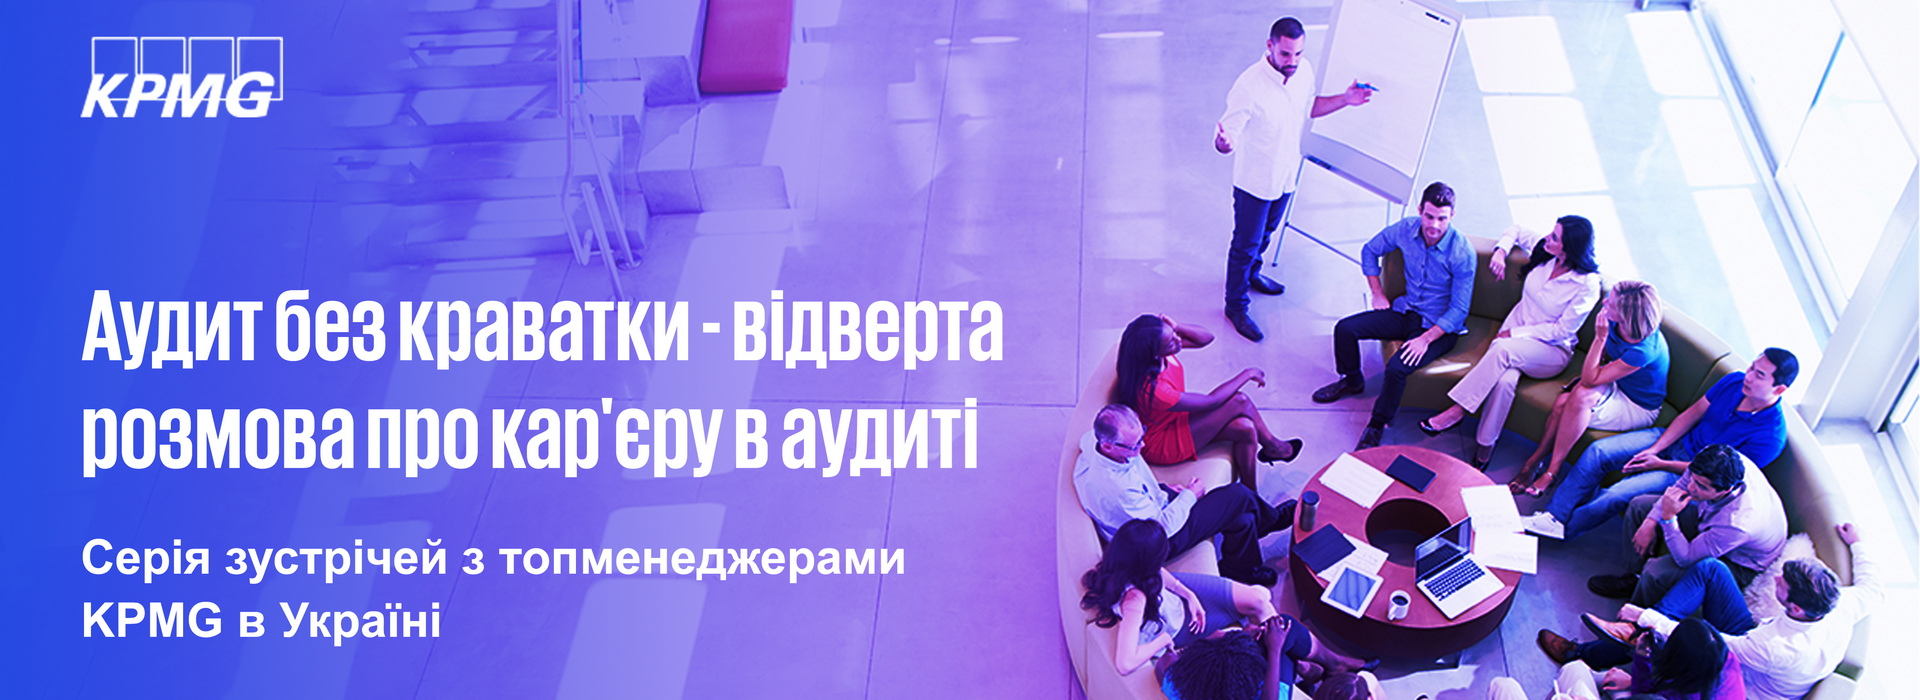 KPMG in Ukraine Invites Audit Professionals to the Series of Offline Meetings with Top Managers of KPMG in Ukraine “Audit Without a Tie – Open Conversation About Career in Audit”